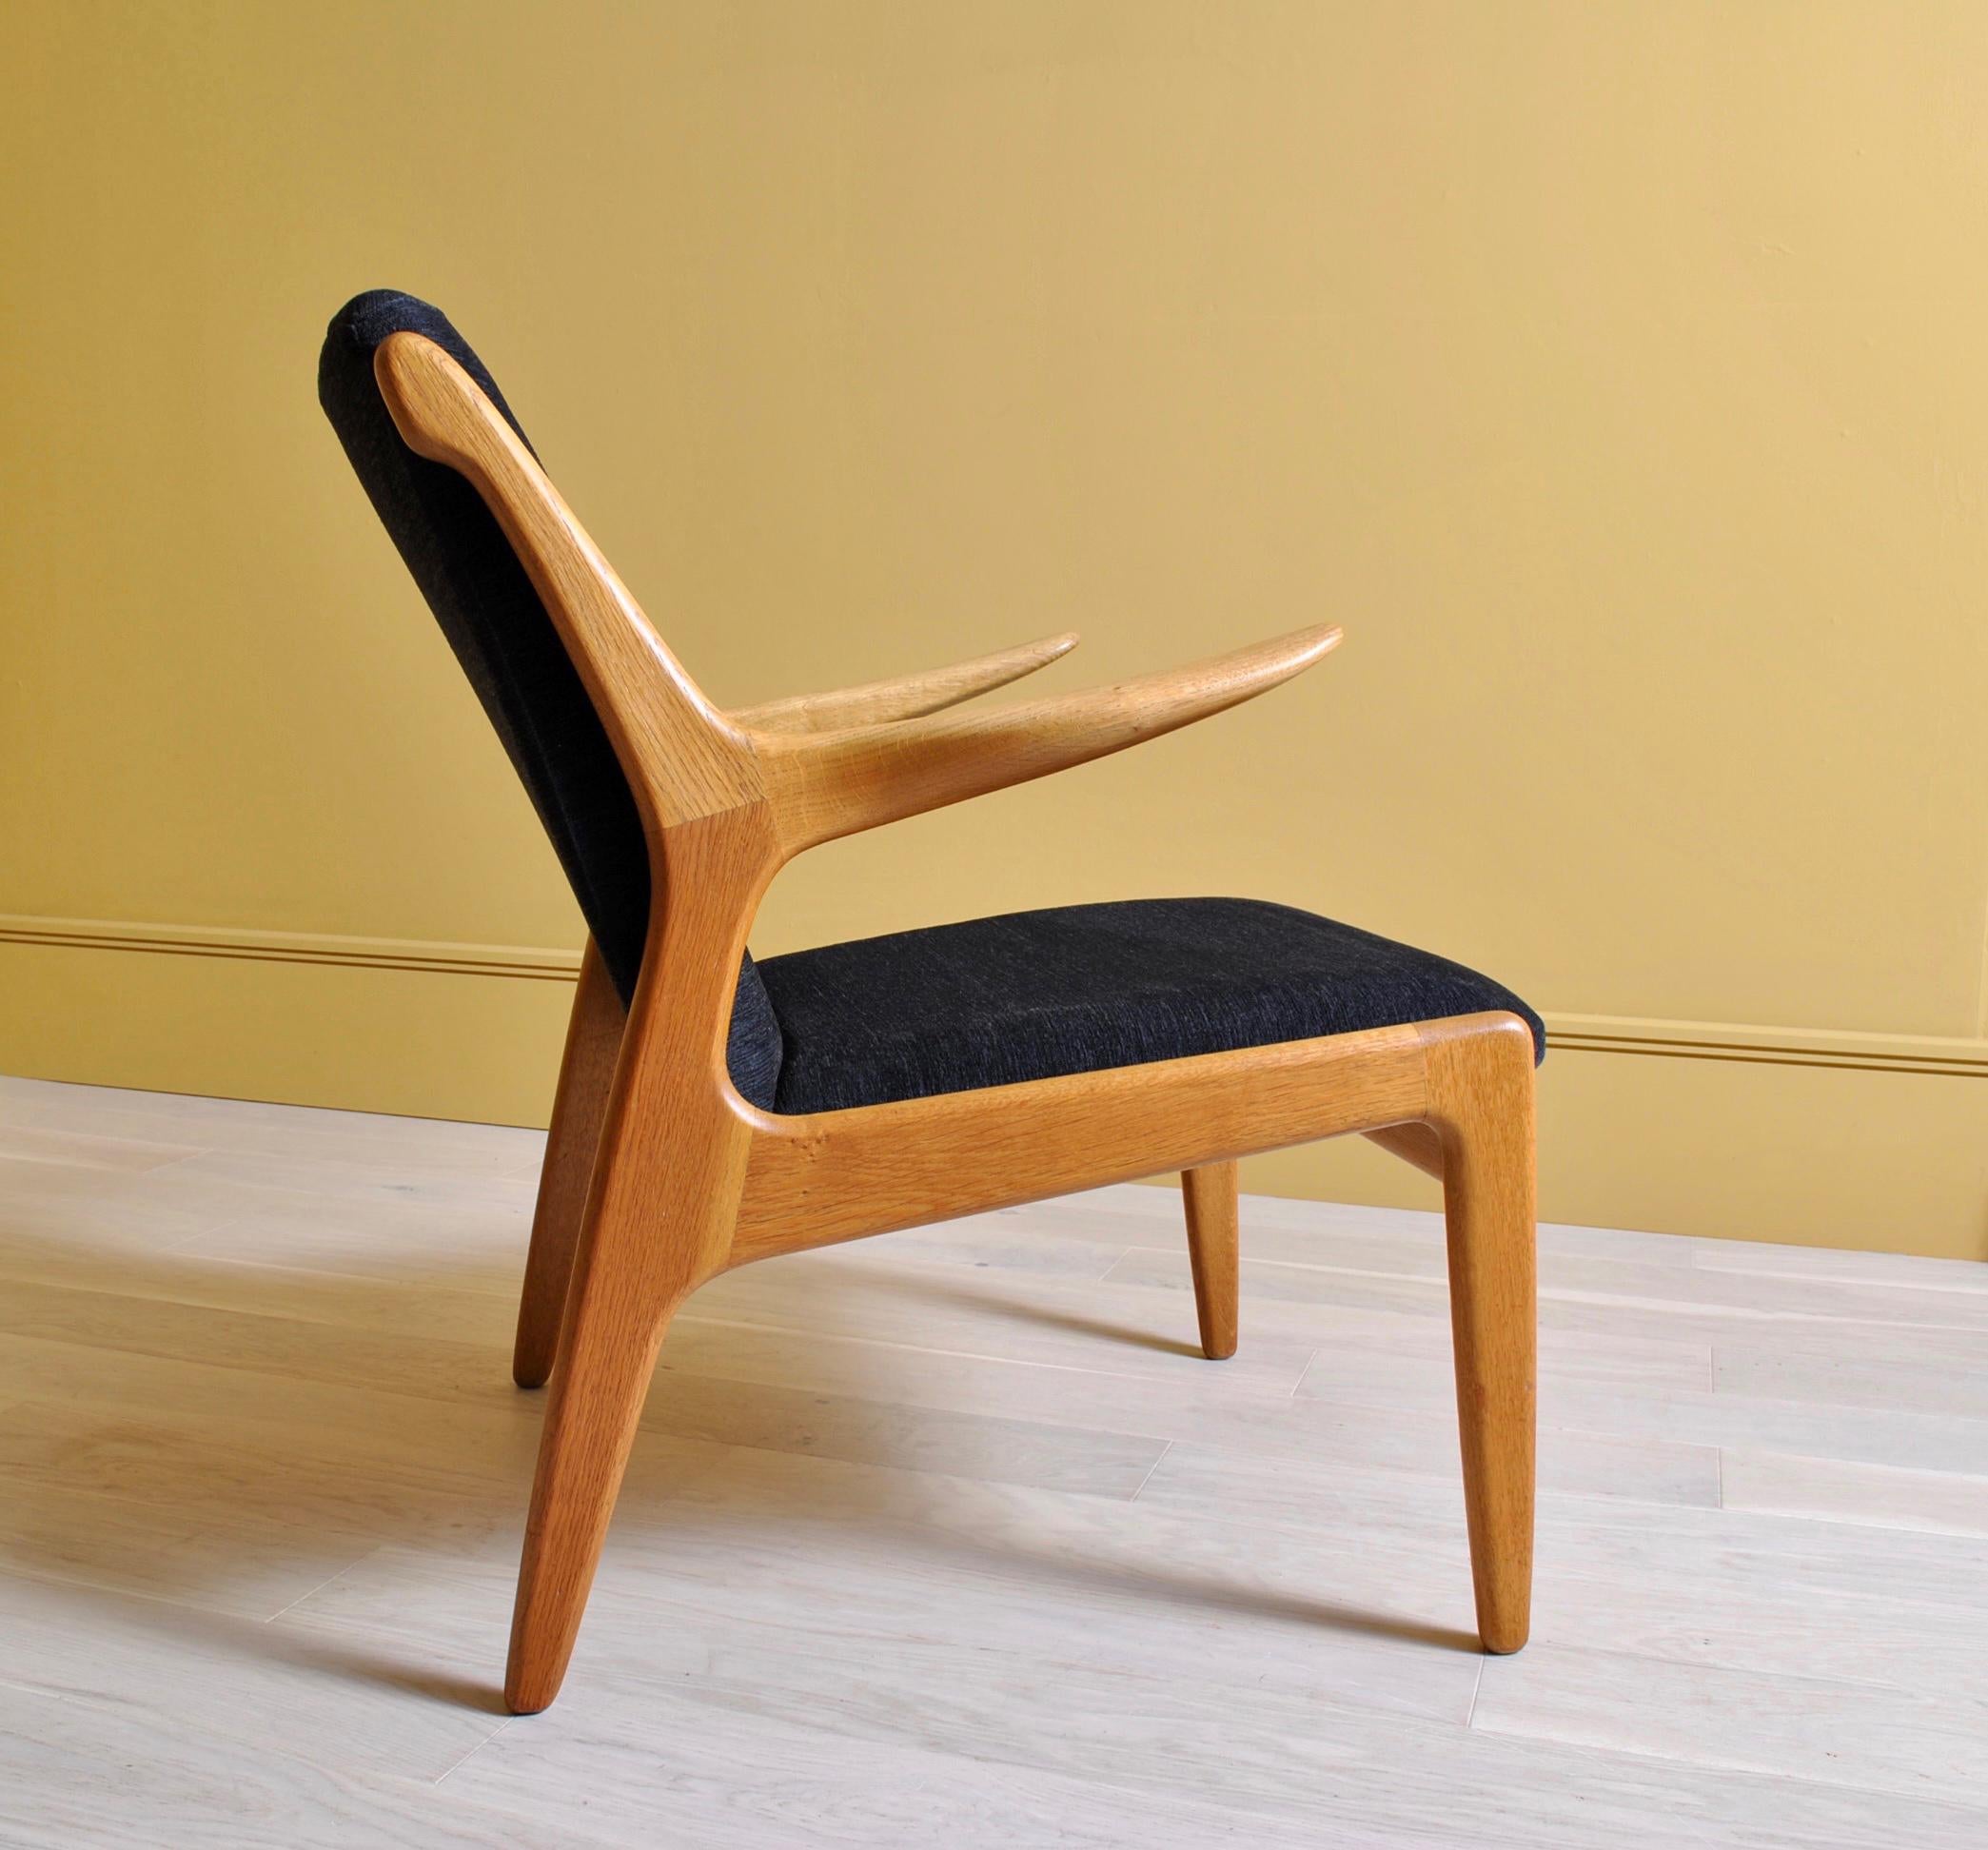 A very rare lounge armchair, the Strit chair by Kurt Ostervig. Produced by Jason Mobler, 1955. Lovely golden European oak frame. It bears some similarities to the Ole Wanscher design for Rud Rasmussen (now Carl Hansen). A striking and welcoming